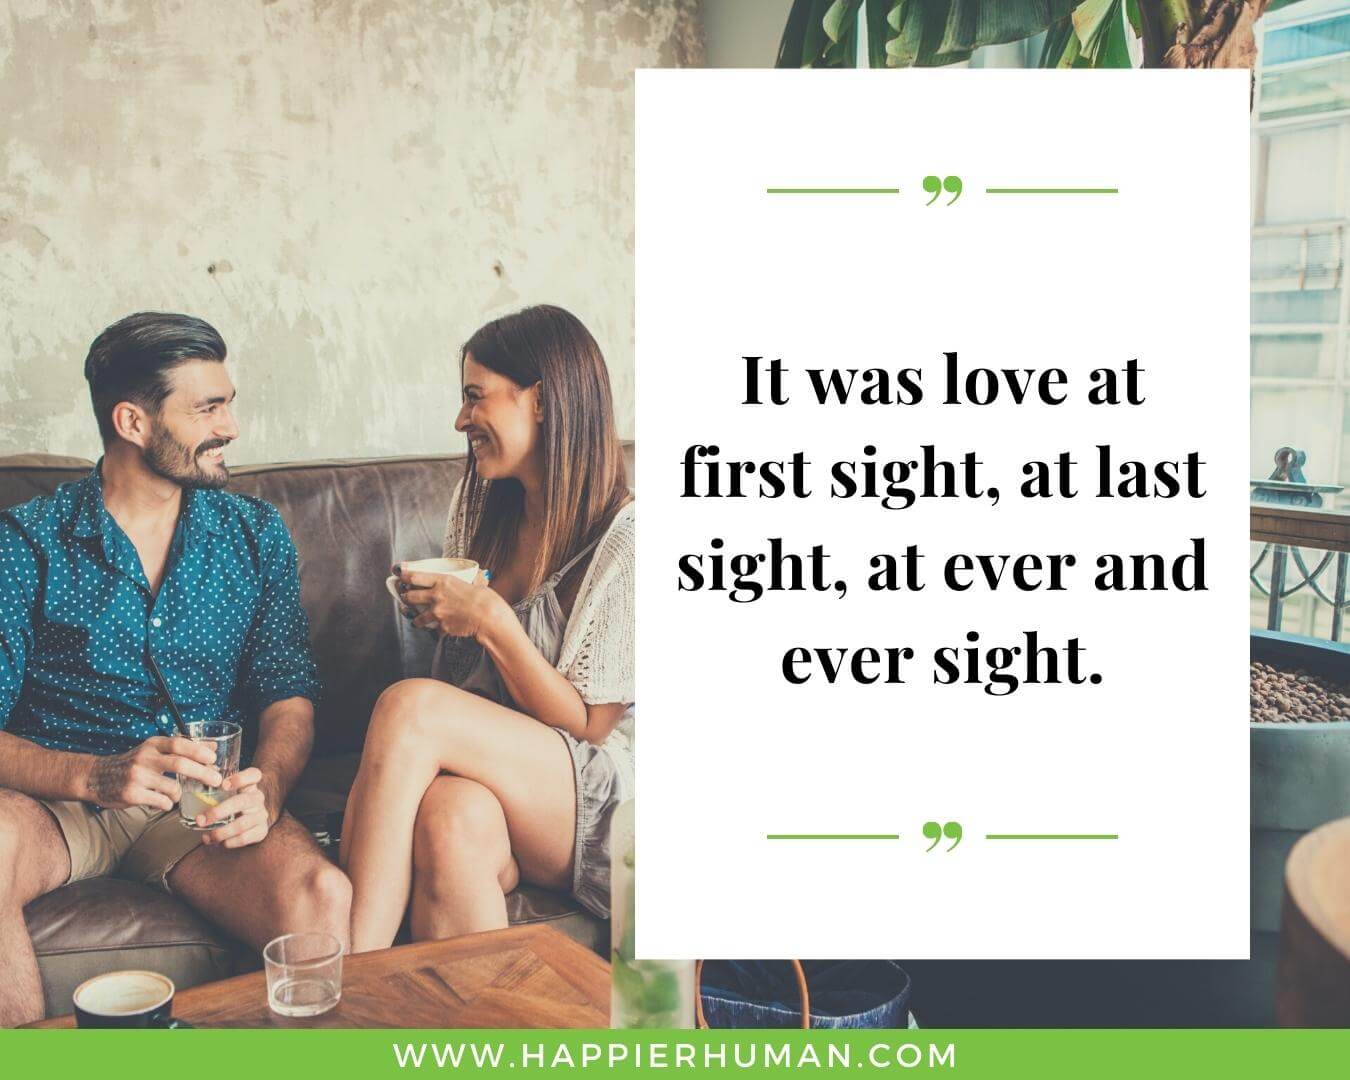 Unconditional Love Quotes for Her - “It was love at first sight, at last sight, at ever and ever sight.”